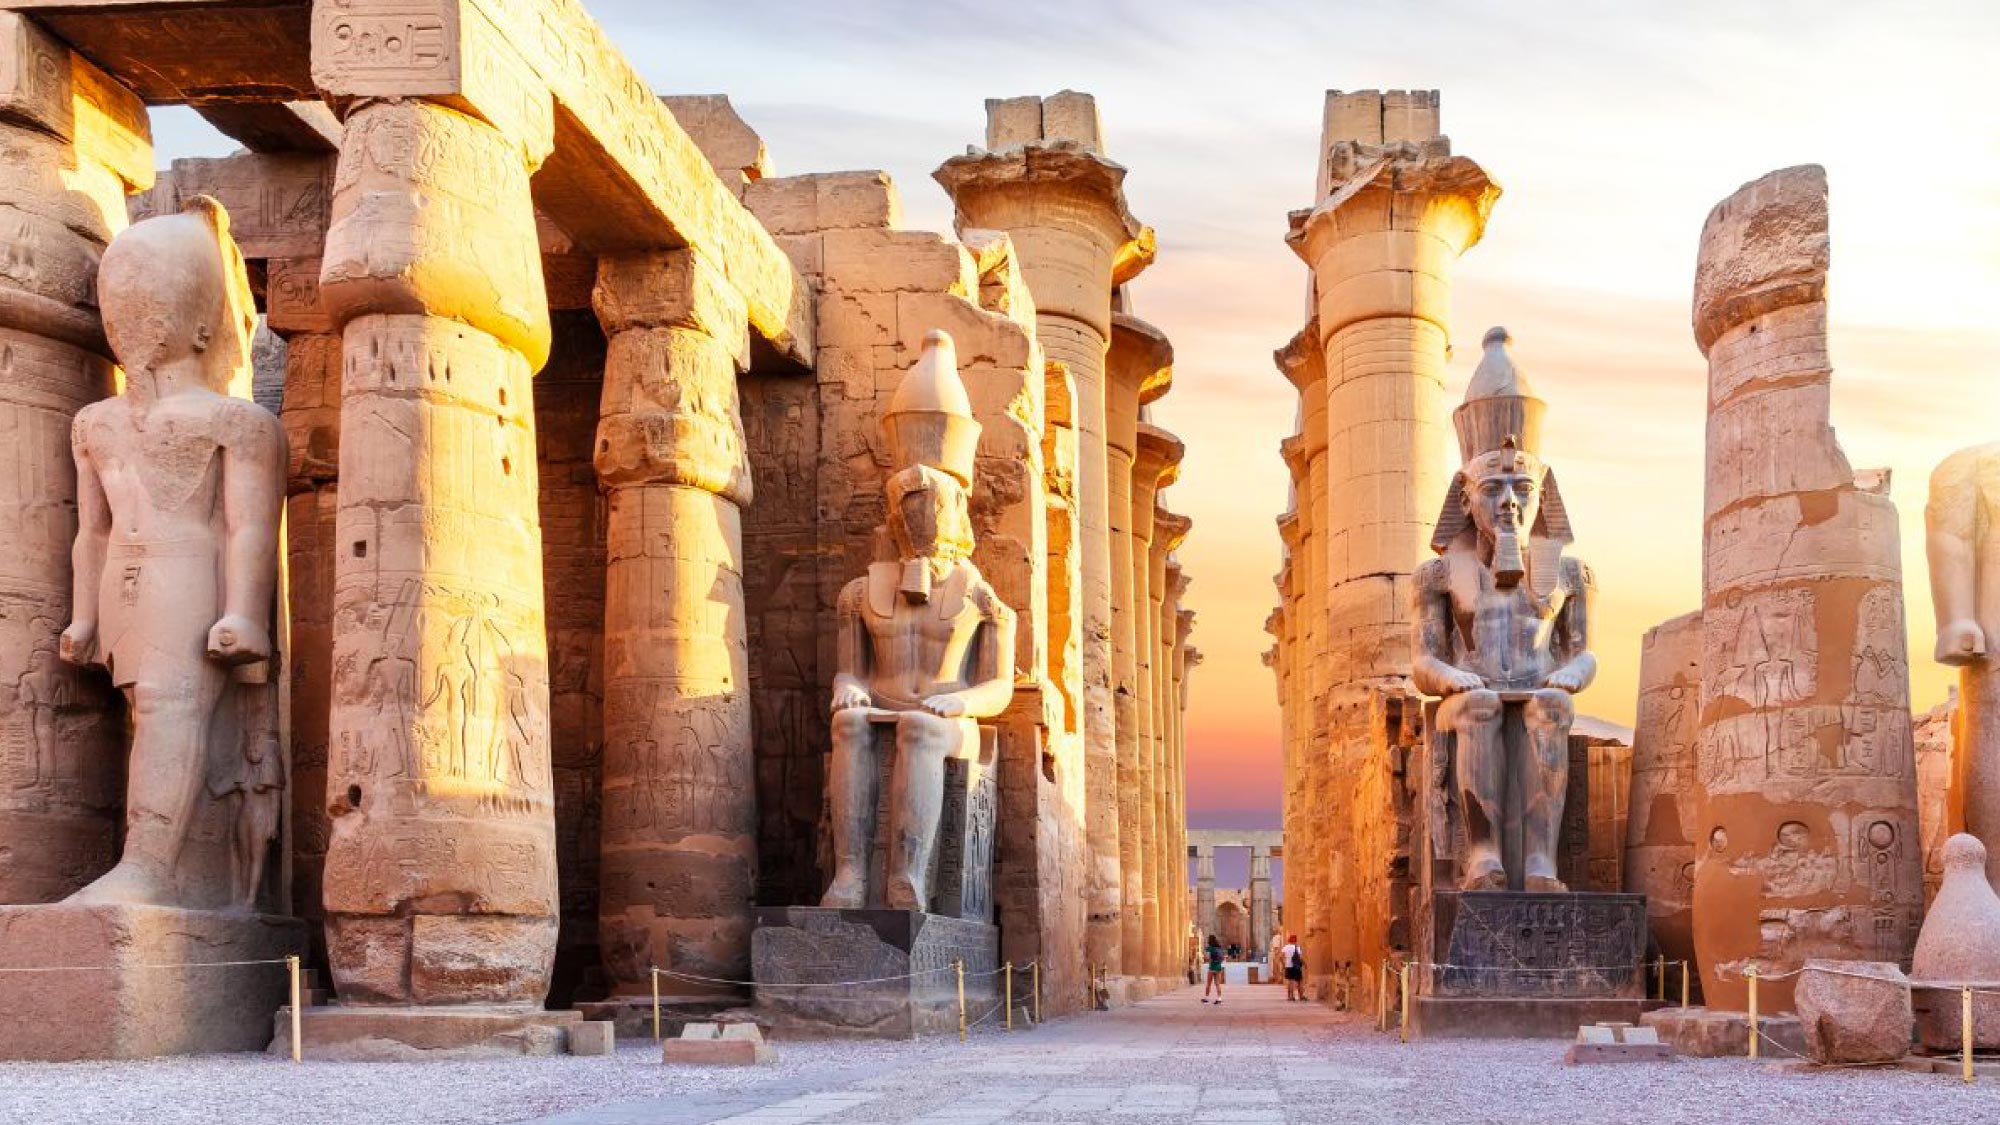 A captivating view of Luxor, Egypt, featuring ancient temples, the serene Nile River, and the charming village of Karnak. This historic city is renowned for its stunning archaeological sites and rich cultural heritage